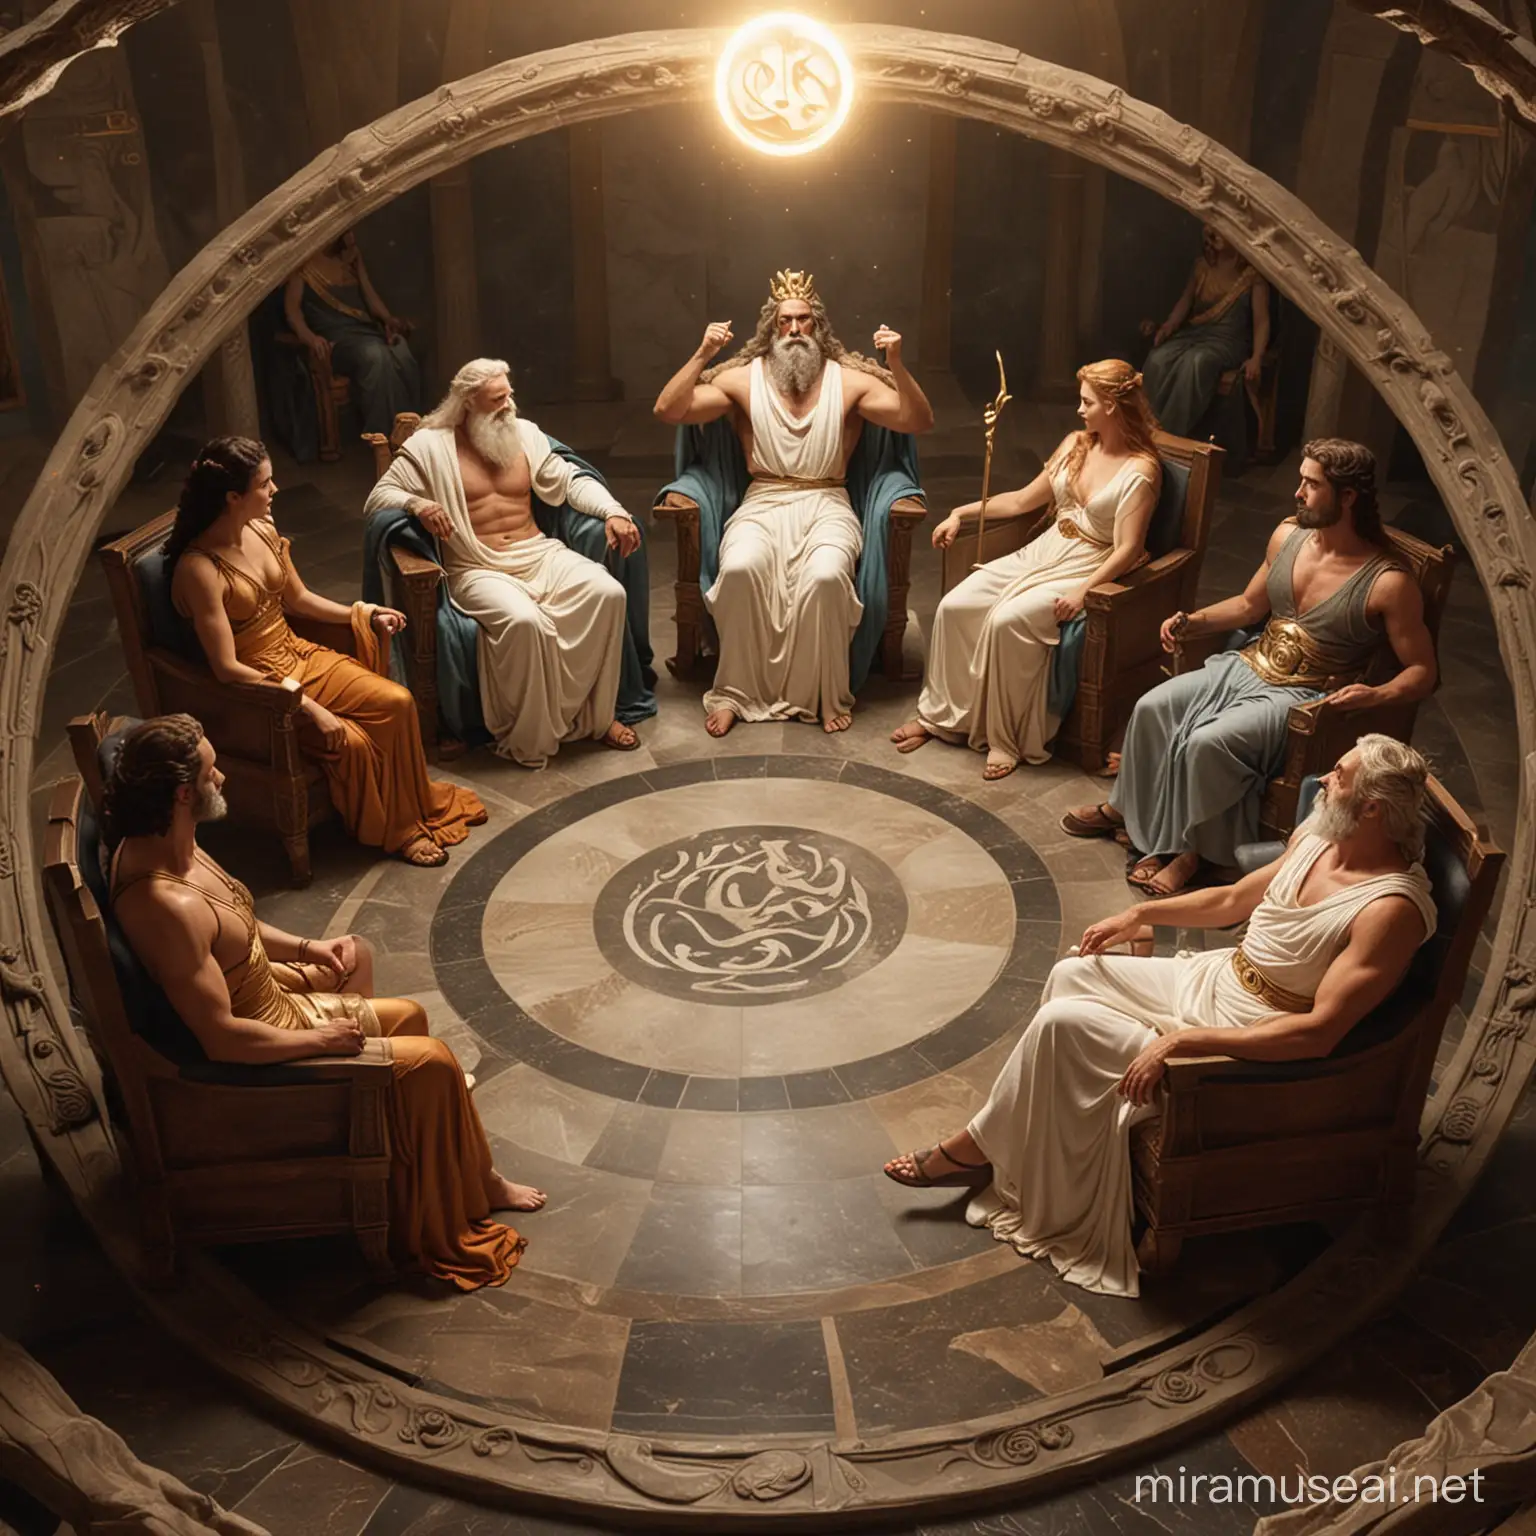 Zeus, Hades, Poseidon and the other Olympian gods and goddesses sitting in their armchairs in a perfect circle, talking